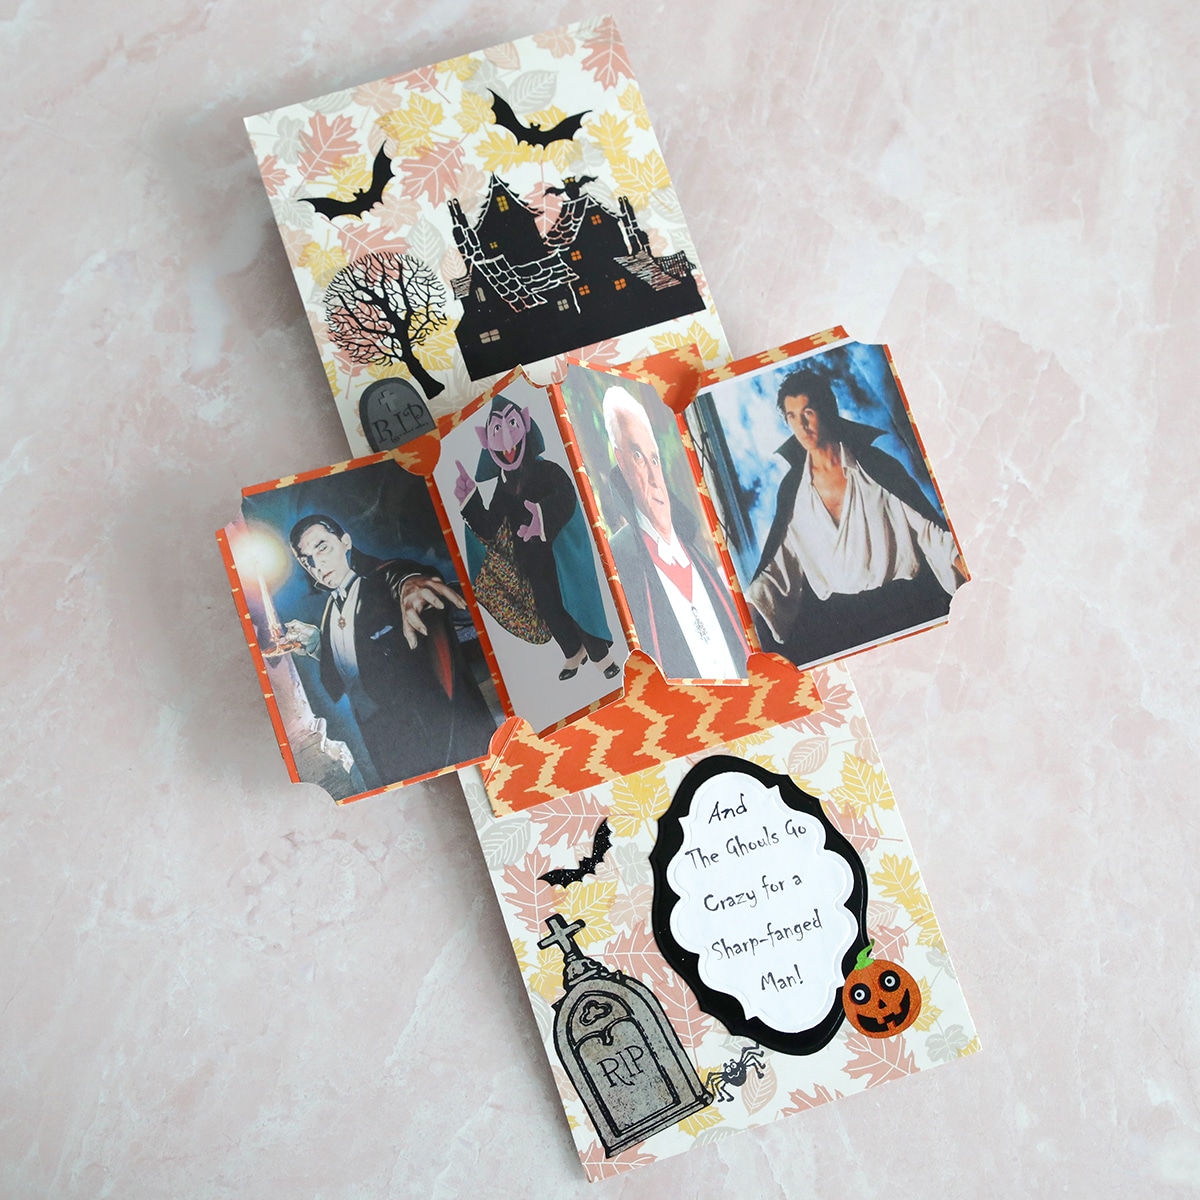 A halloween pop up card with pictures on it.